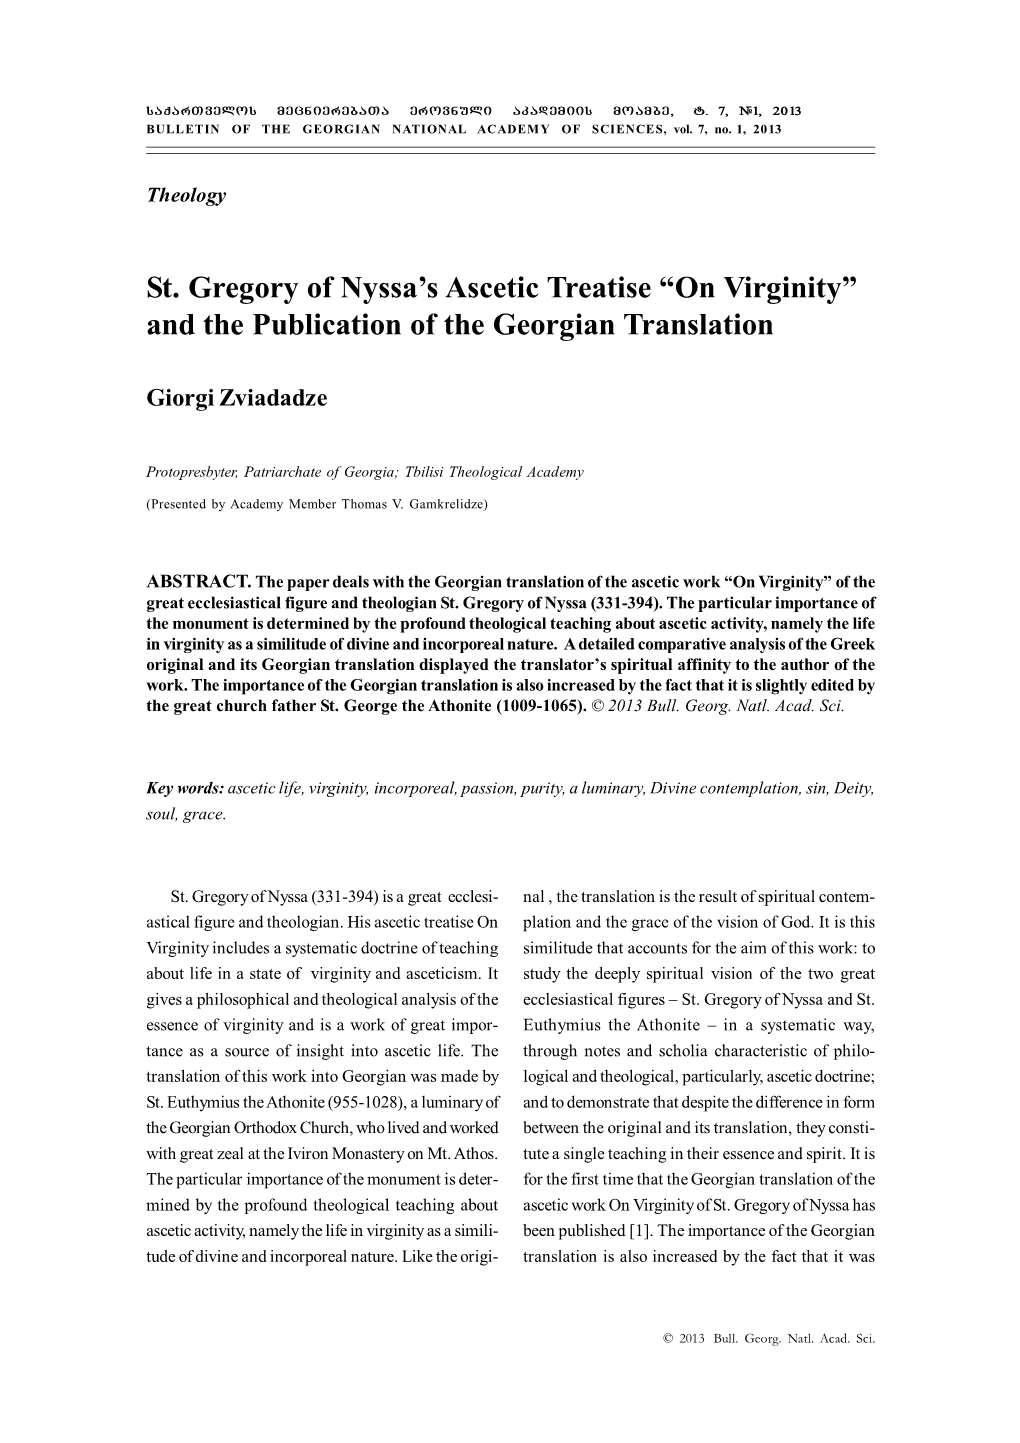 St. Gregory of Nyssa's Ascetic Treatise “On Virginity”